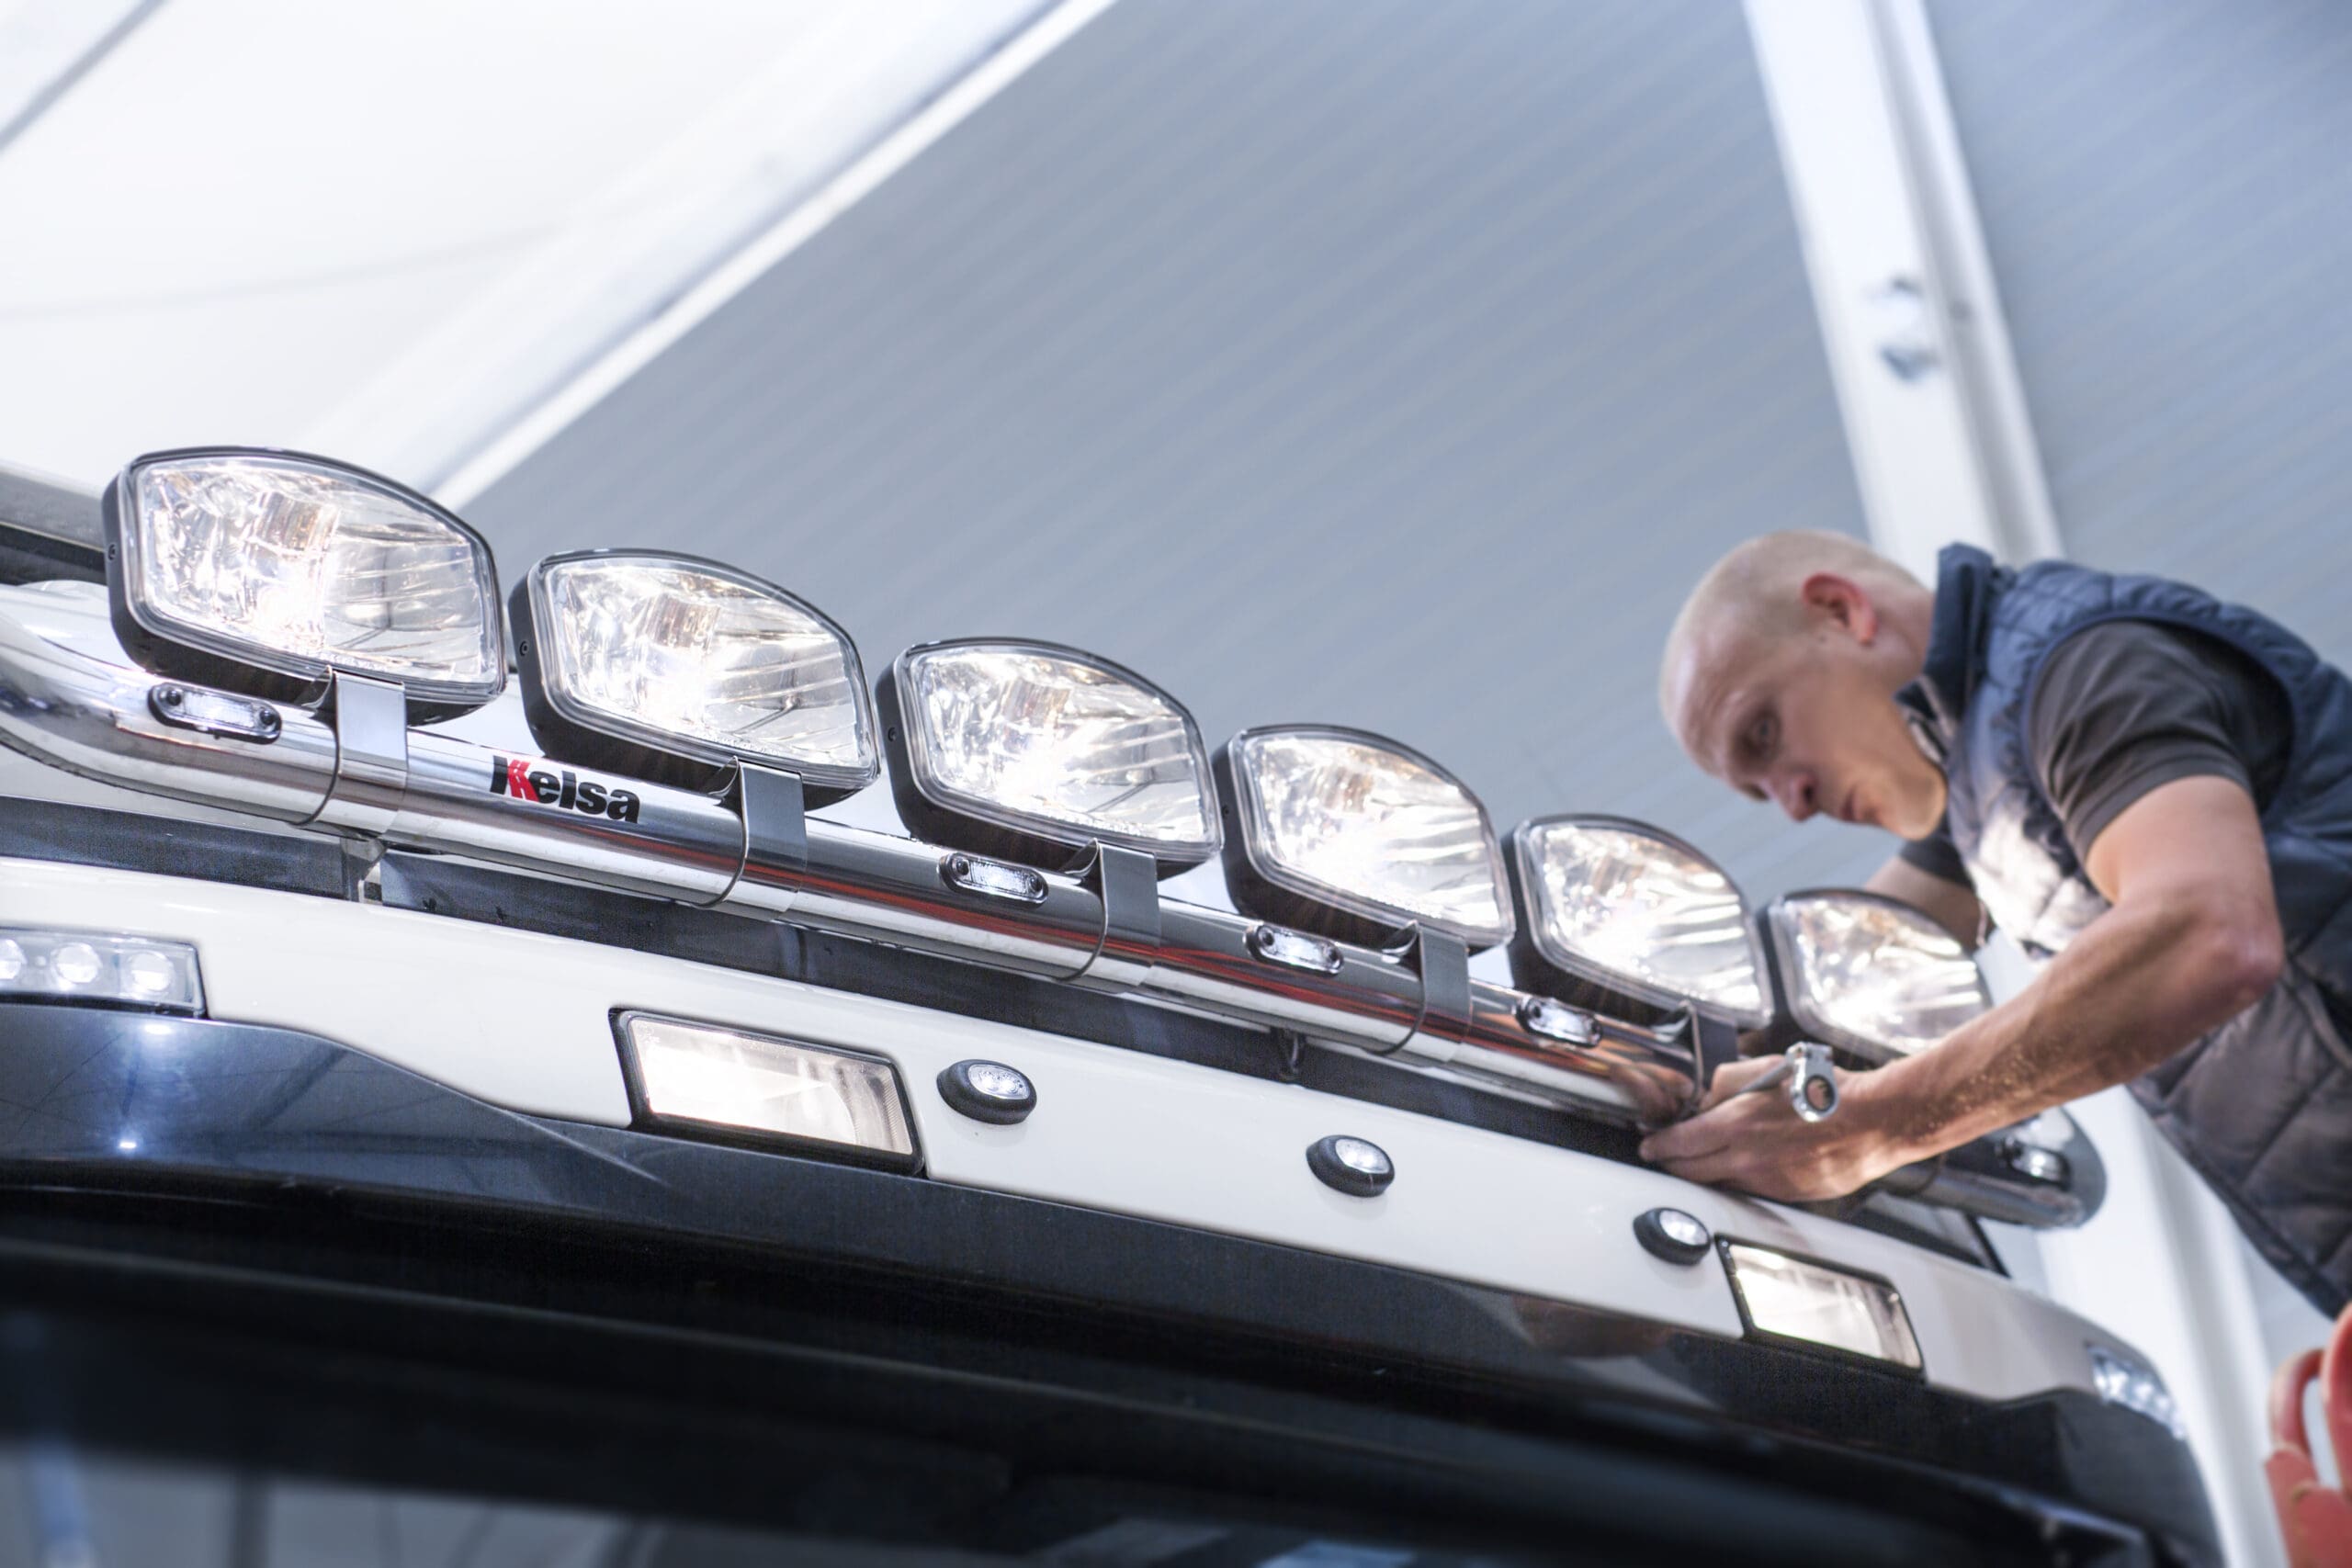 Engineer fitting the lights to the top of a Scania truck.